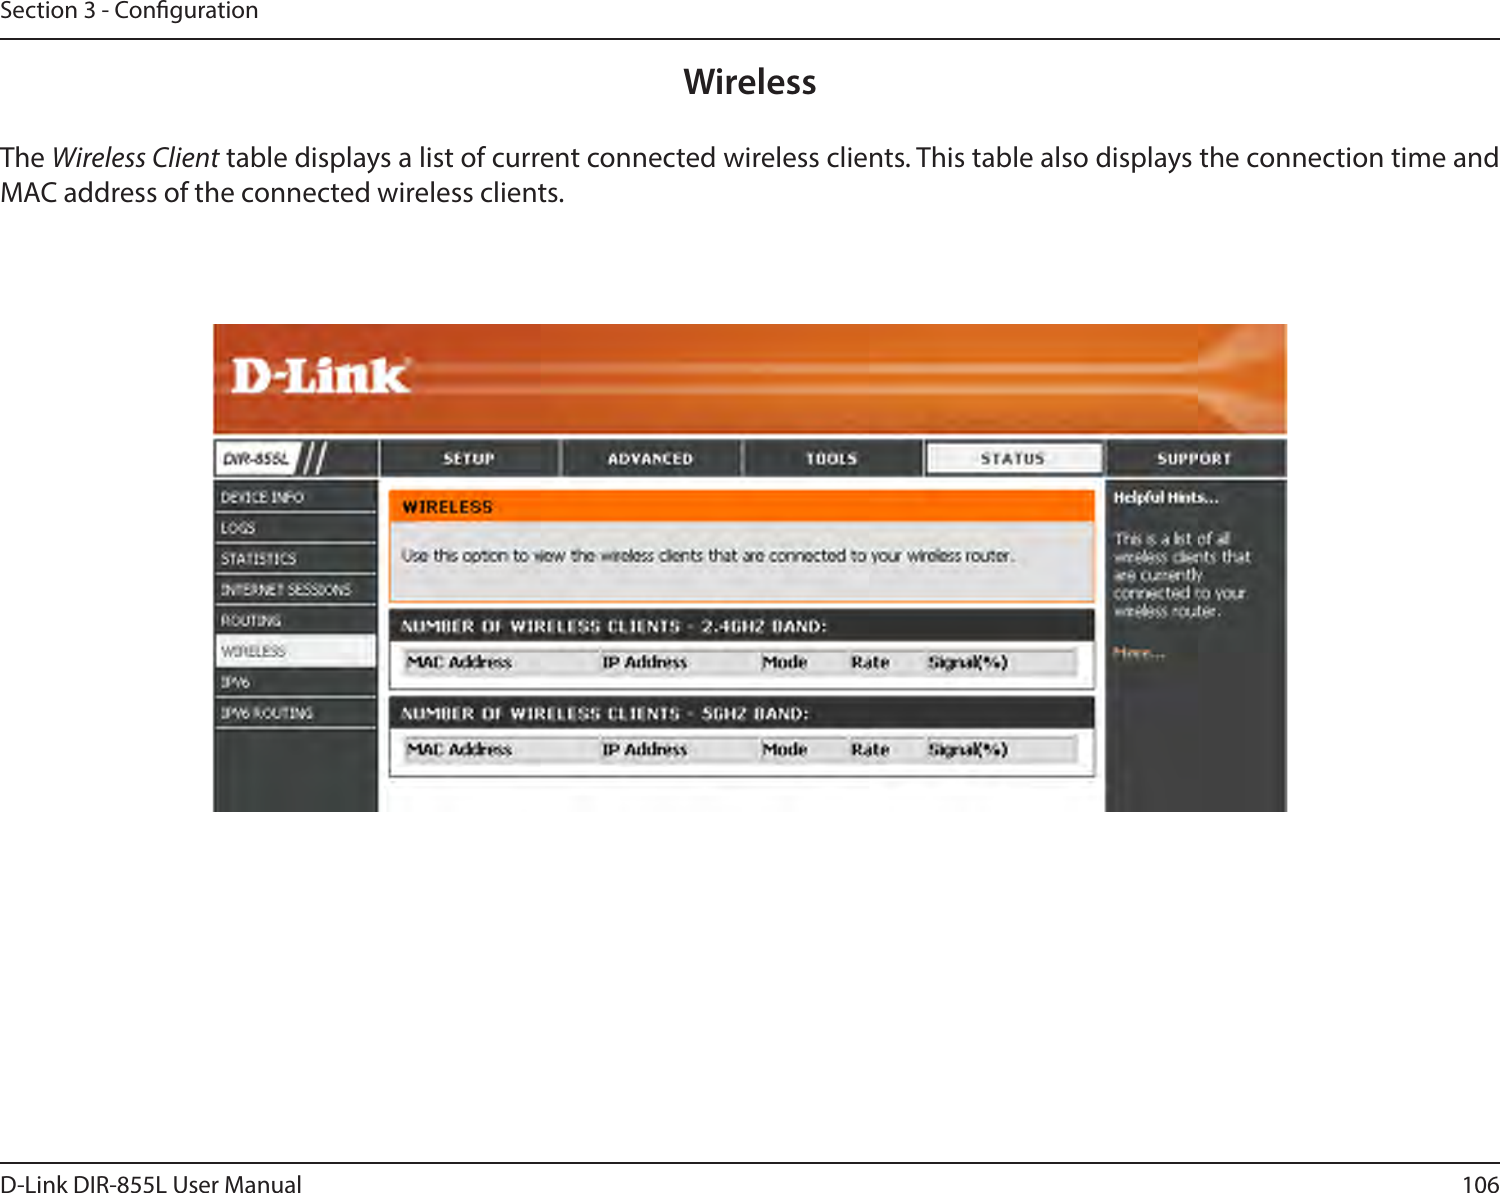 106D-Link DIR-855L User ManualSection 3 - CongurationThe Wireless Client table displays a list of current connected wireless clients. This table also displays the connection time and MAC address of the connected wireless clients.Wireless